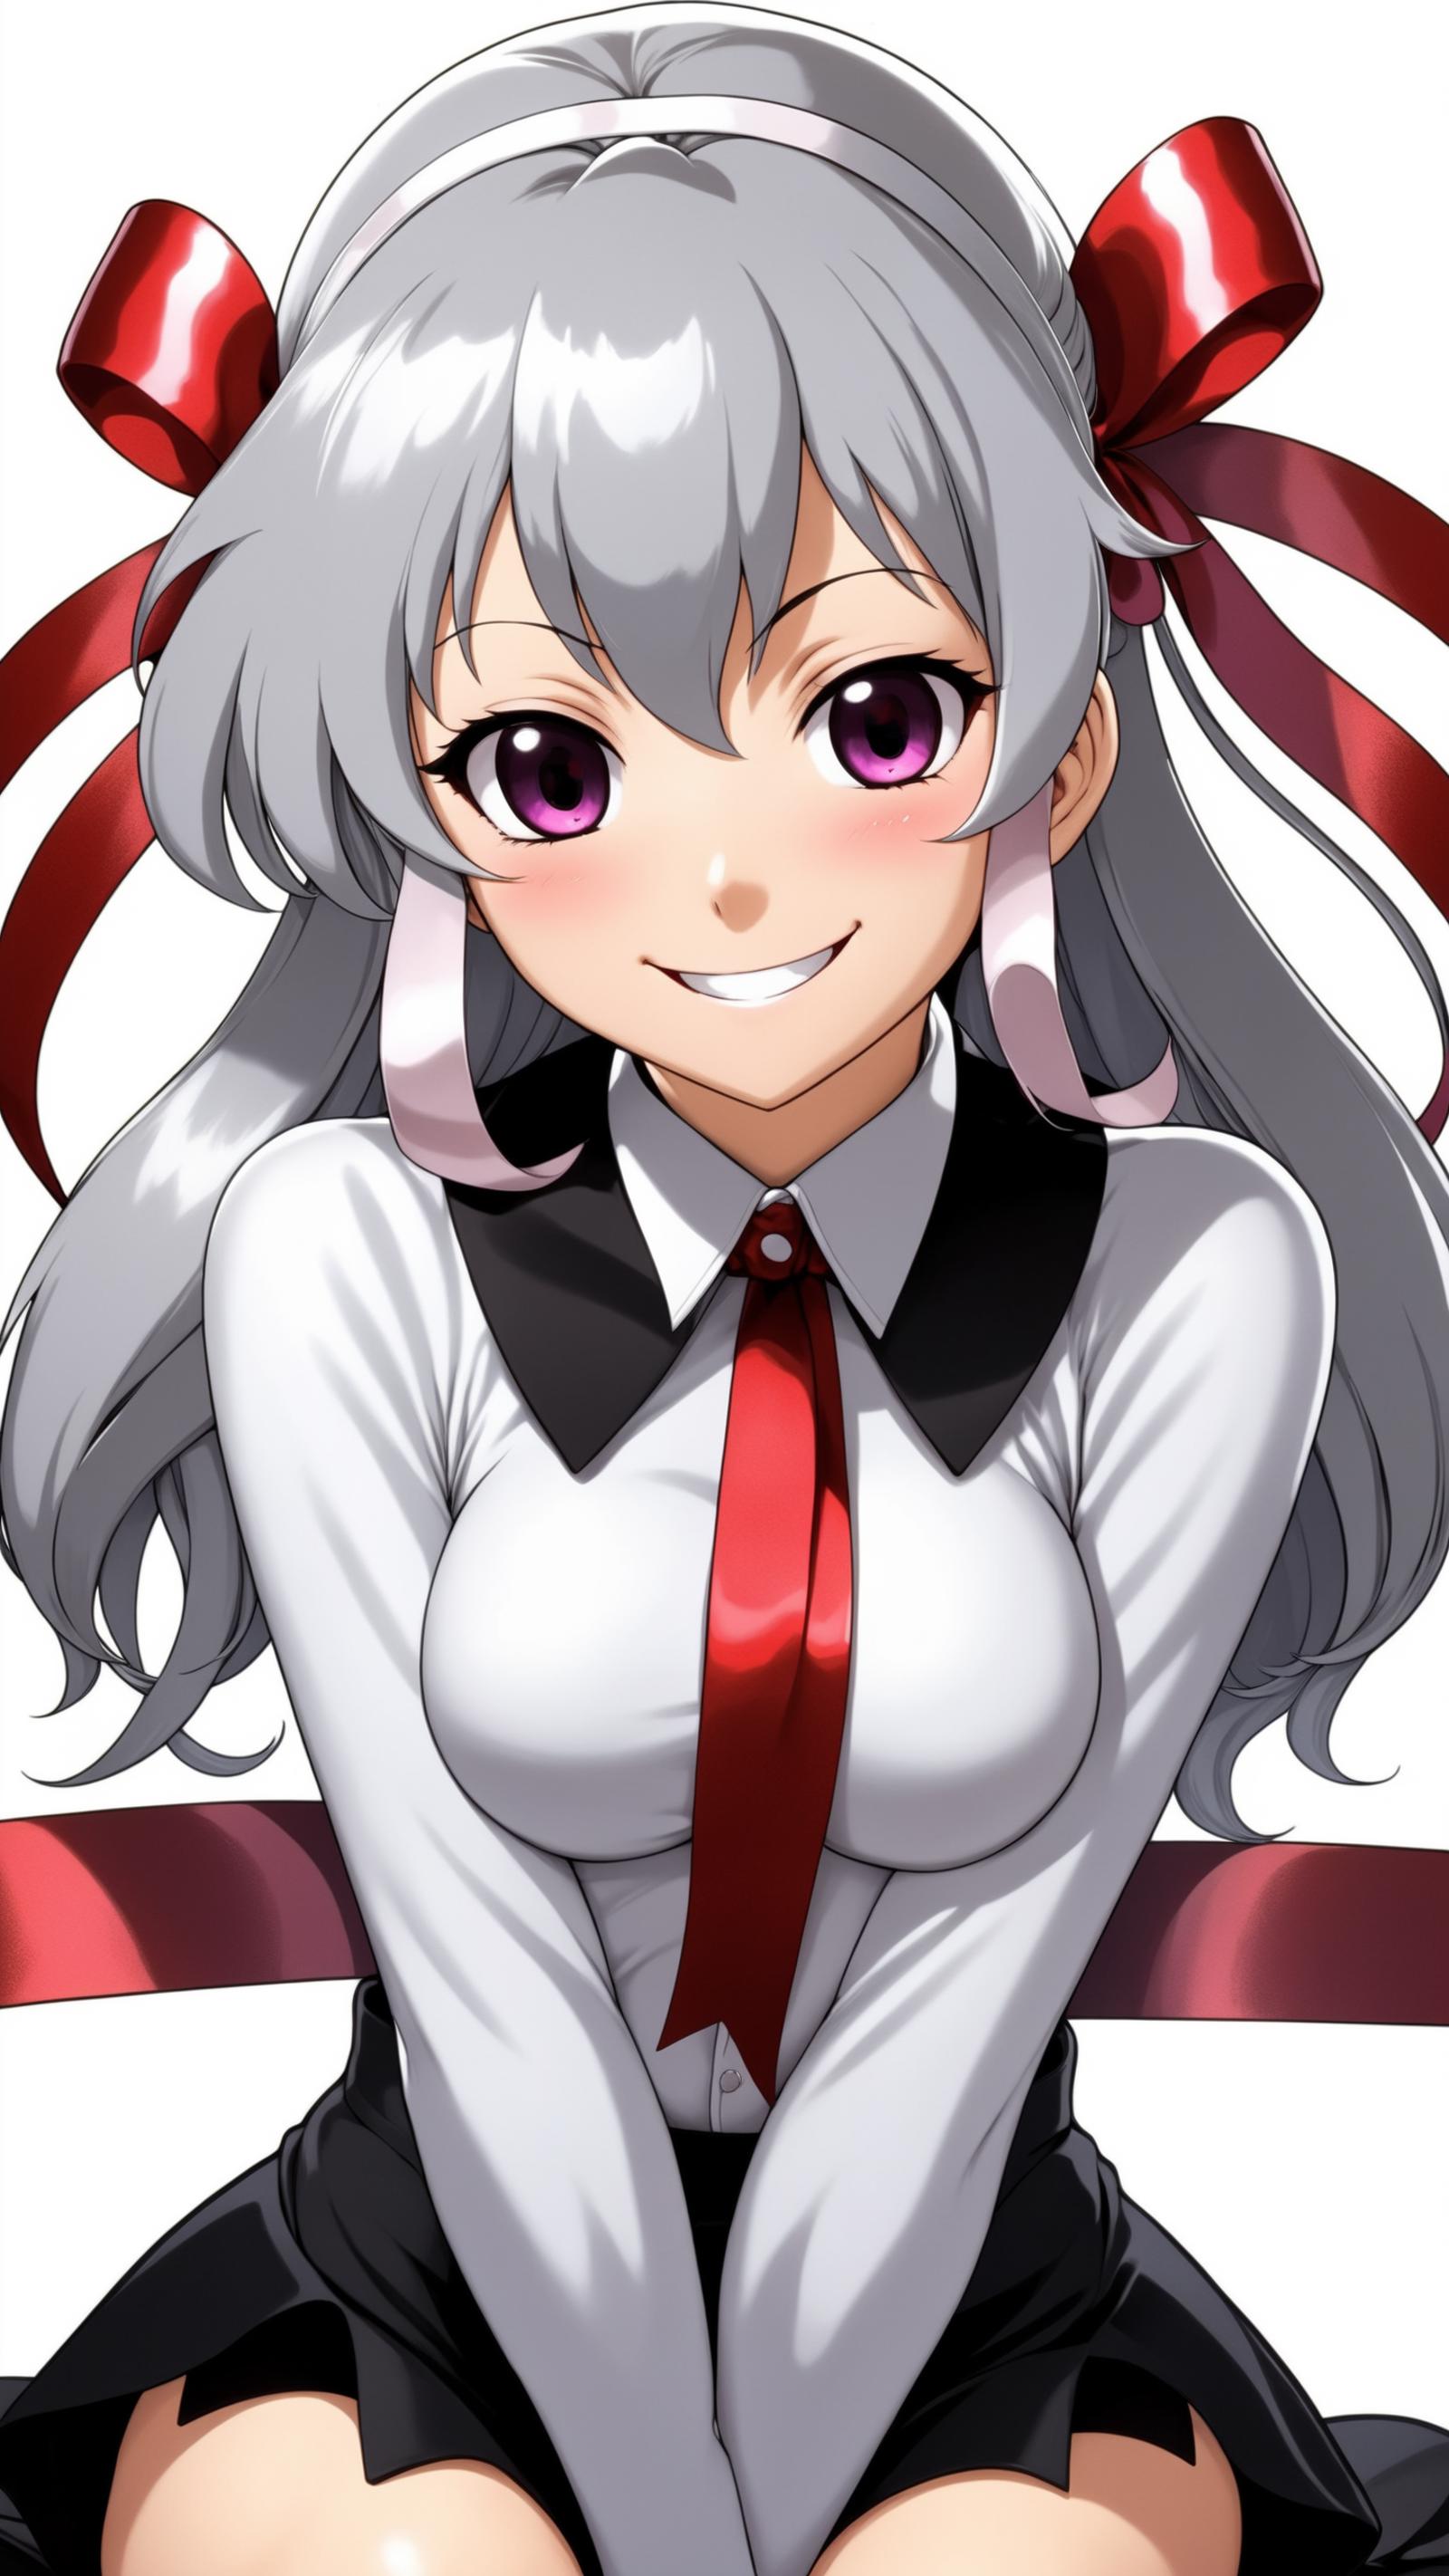 A smiling girl in a white shirt and red tie.